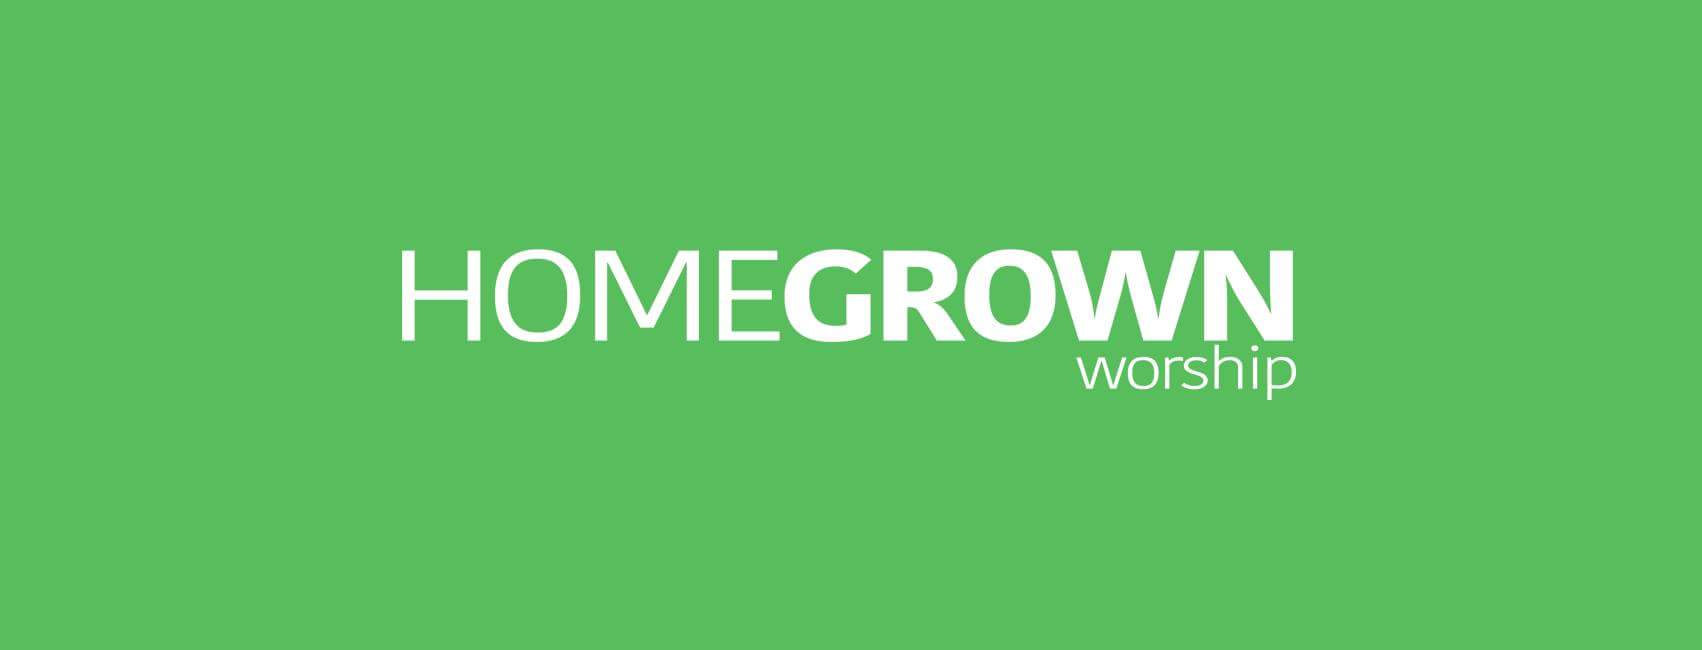 Homegrown Worship To Deliver Weekly New Worship Songs & Form Community of Songwriters